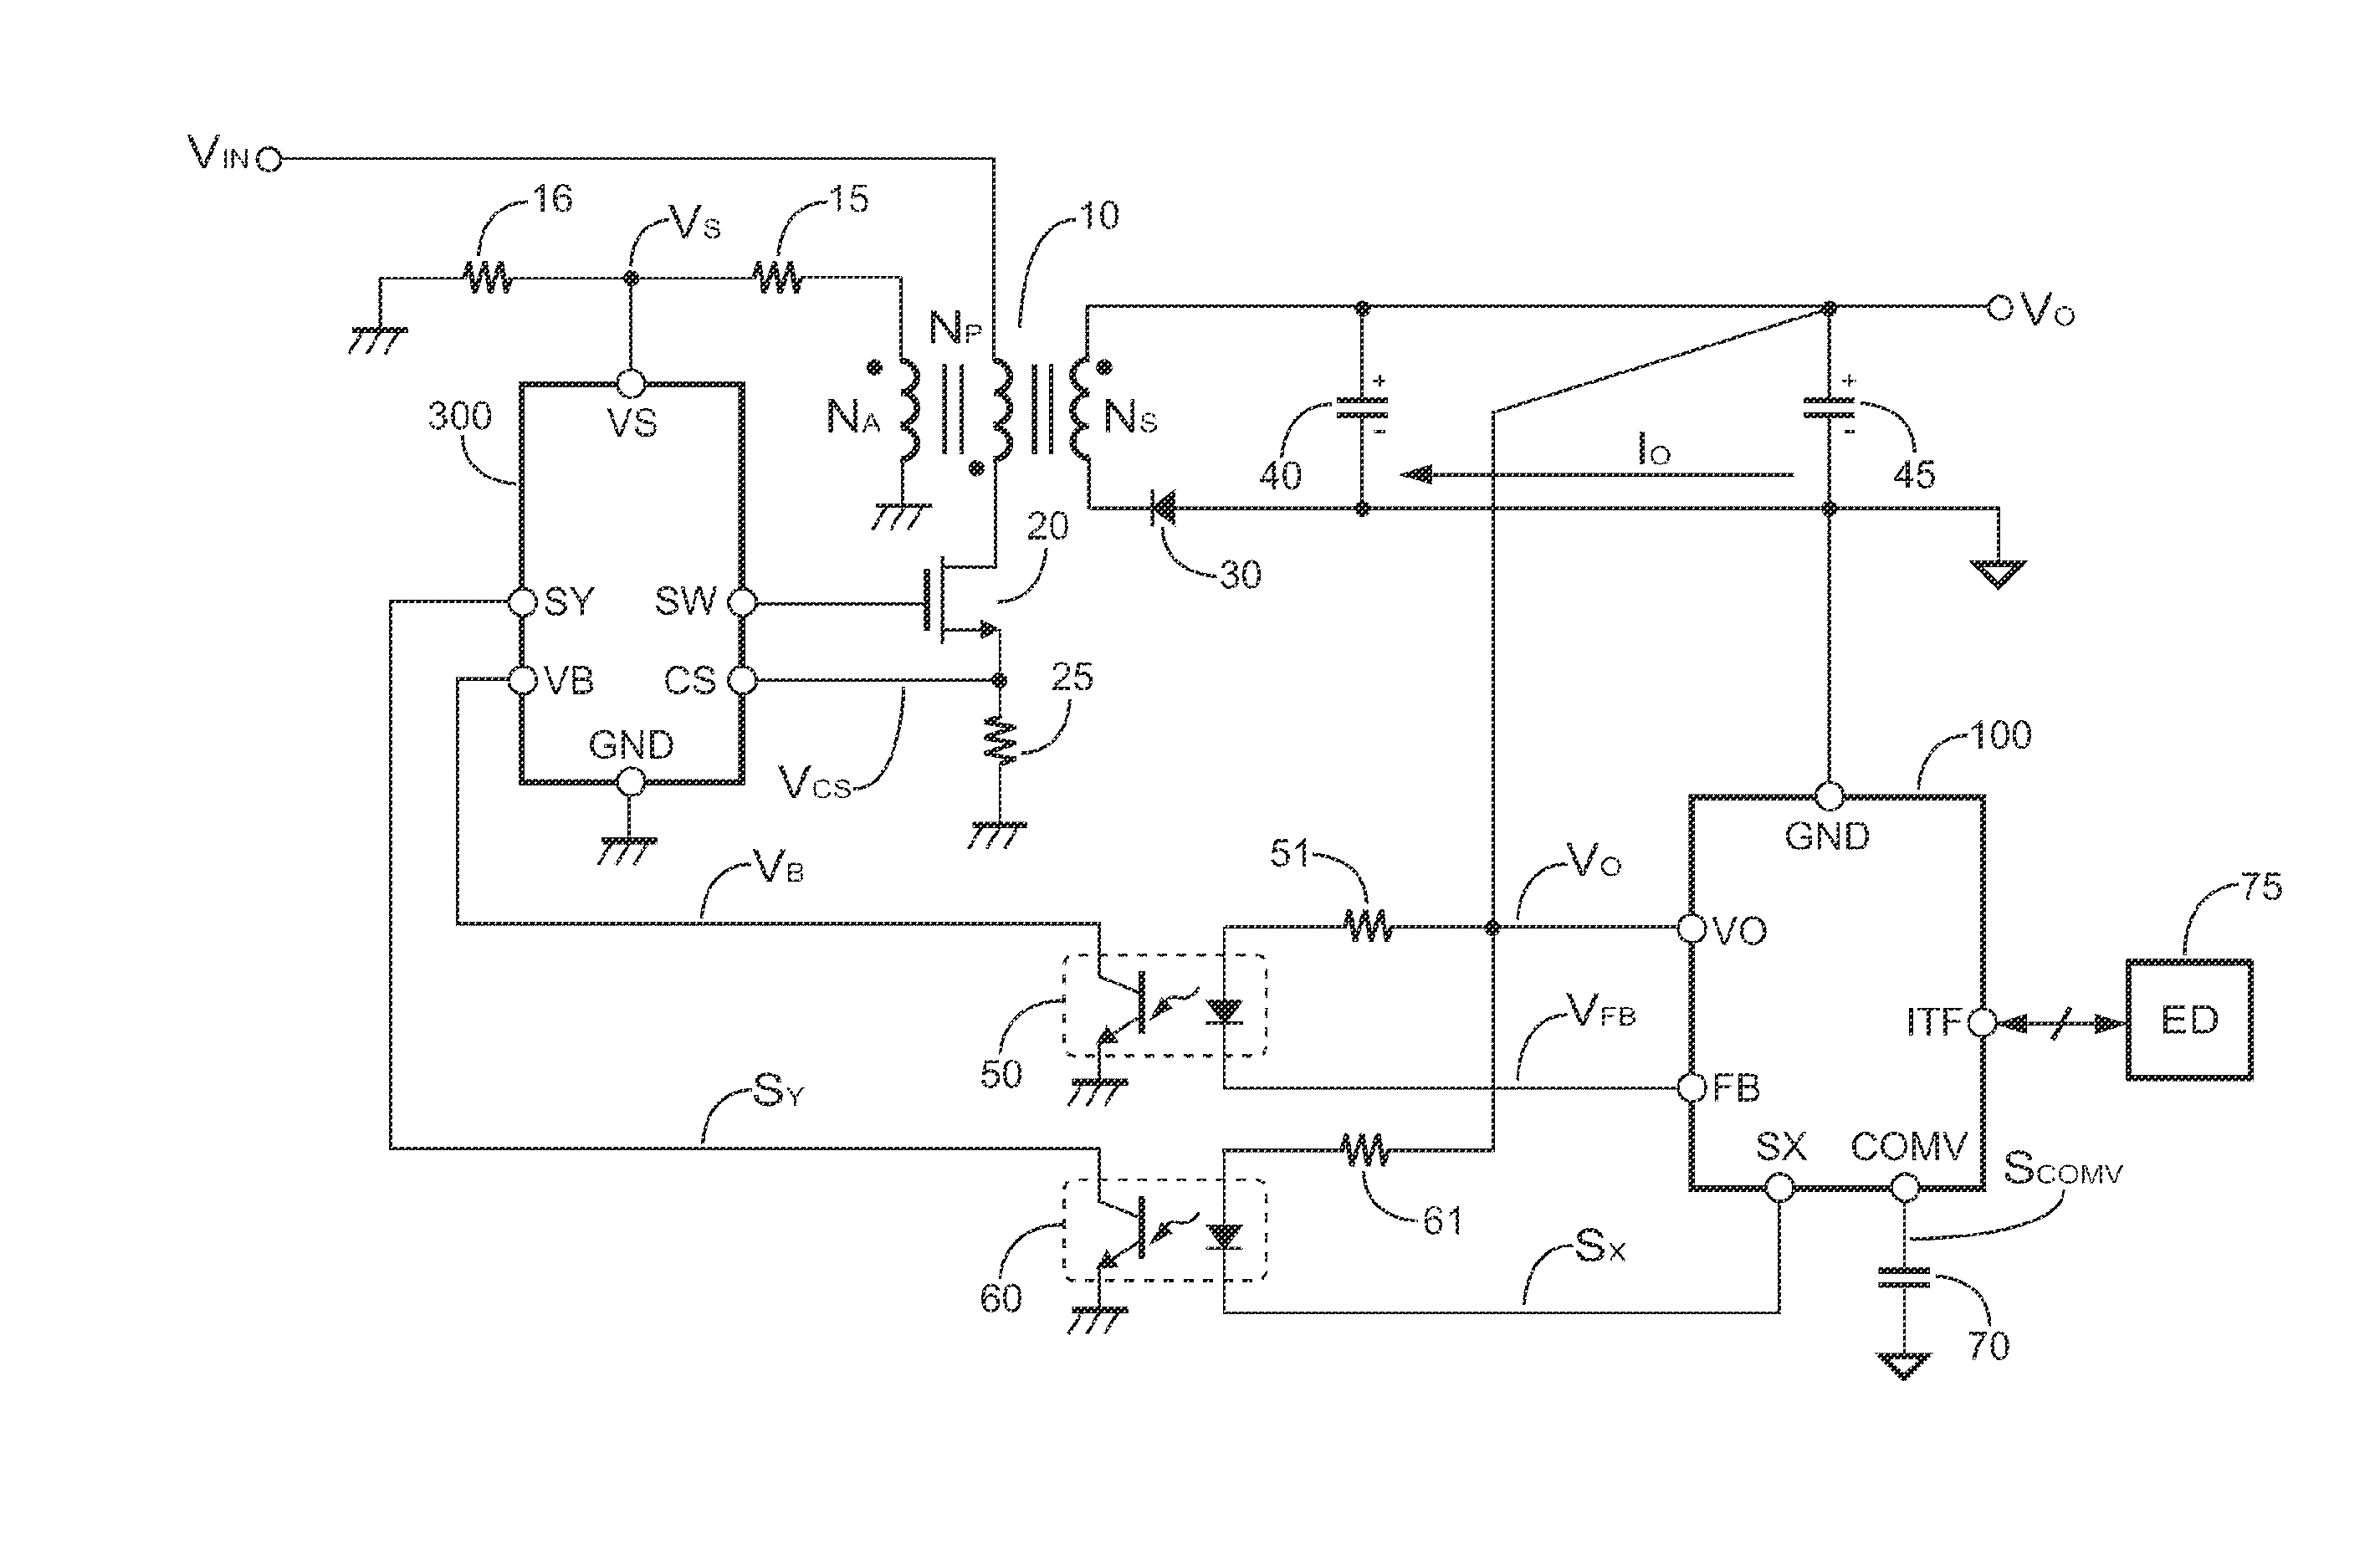 Primary-side controlled programmable power converter